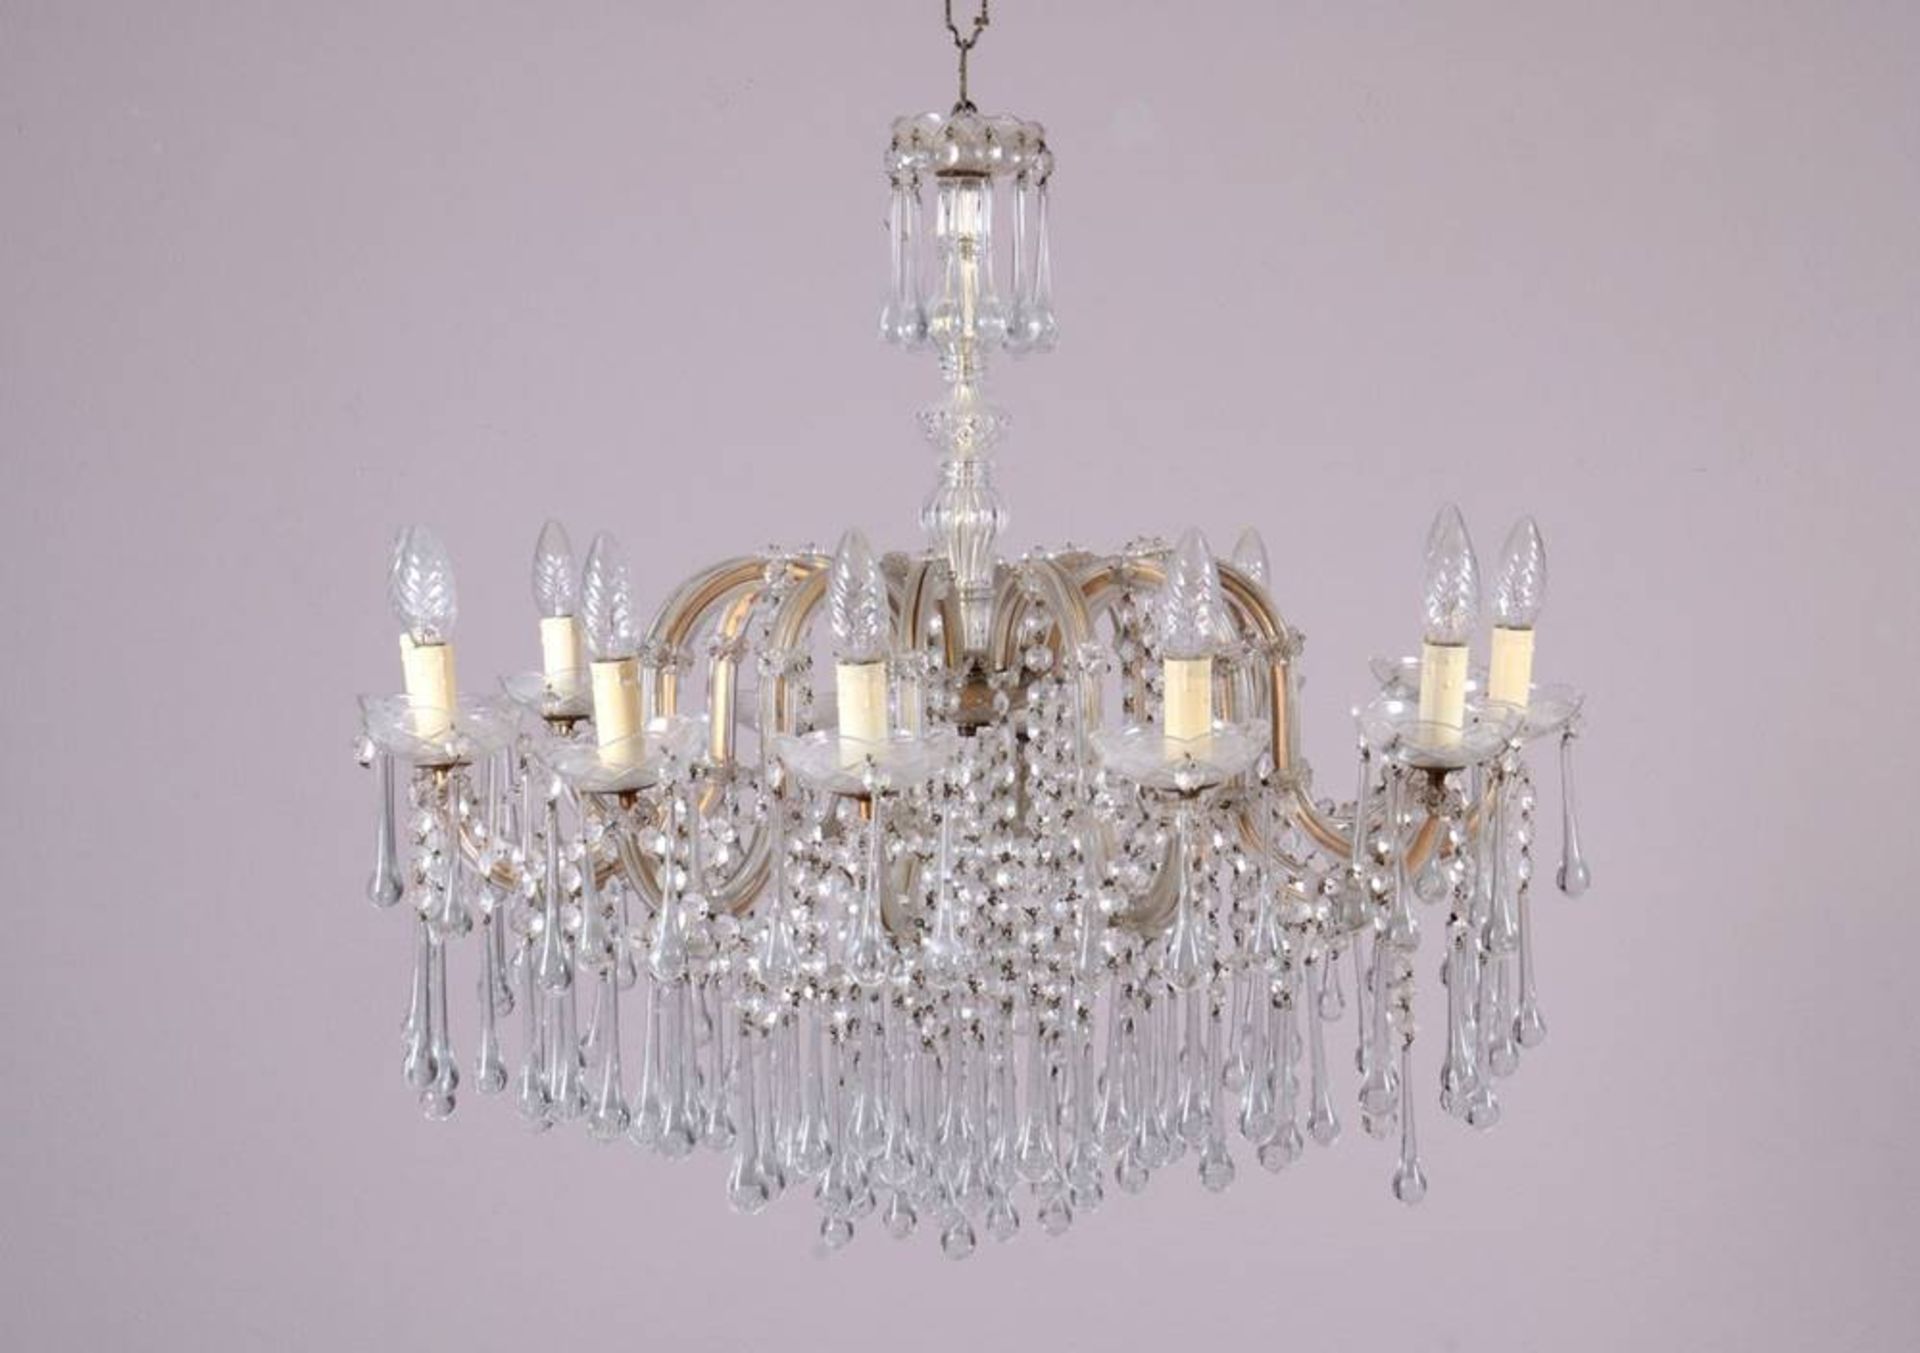 Chandelier20th C., 12 lights., glass-prism and -drop decoration, HxD: 80x82cm, signs of age, few